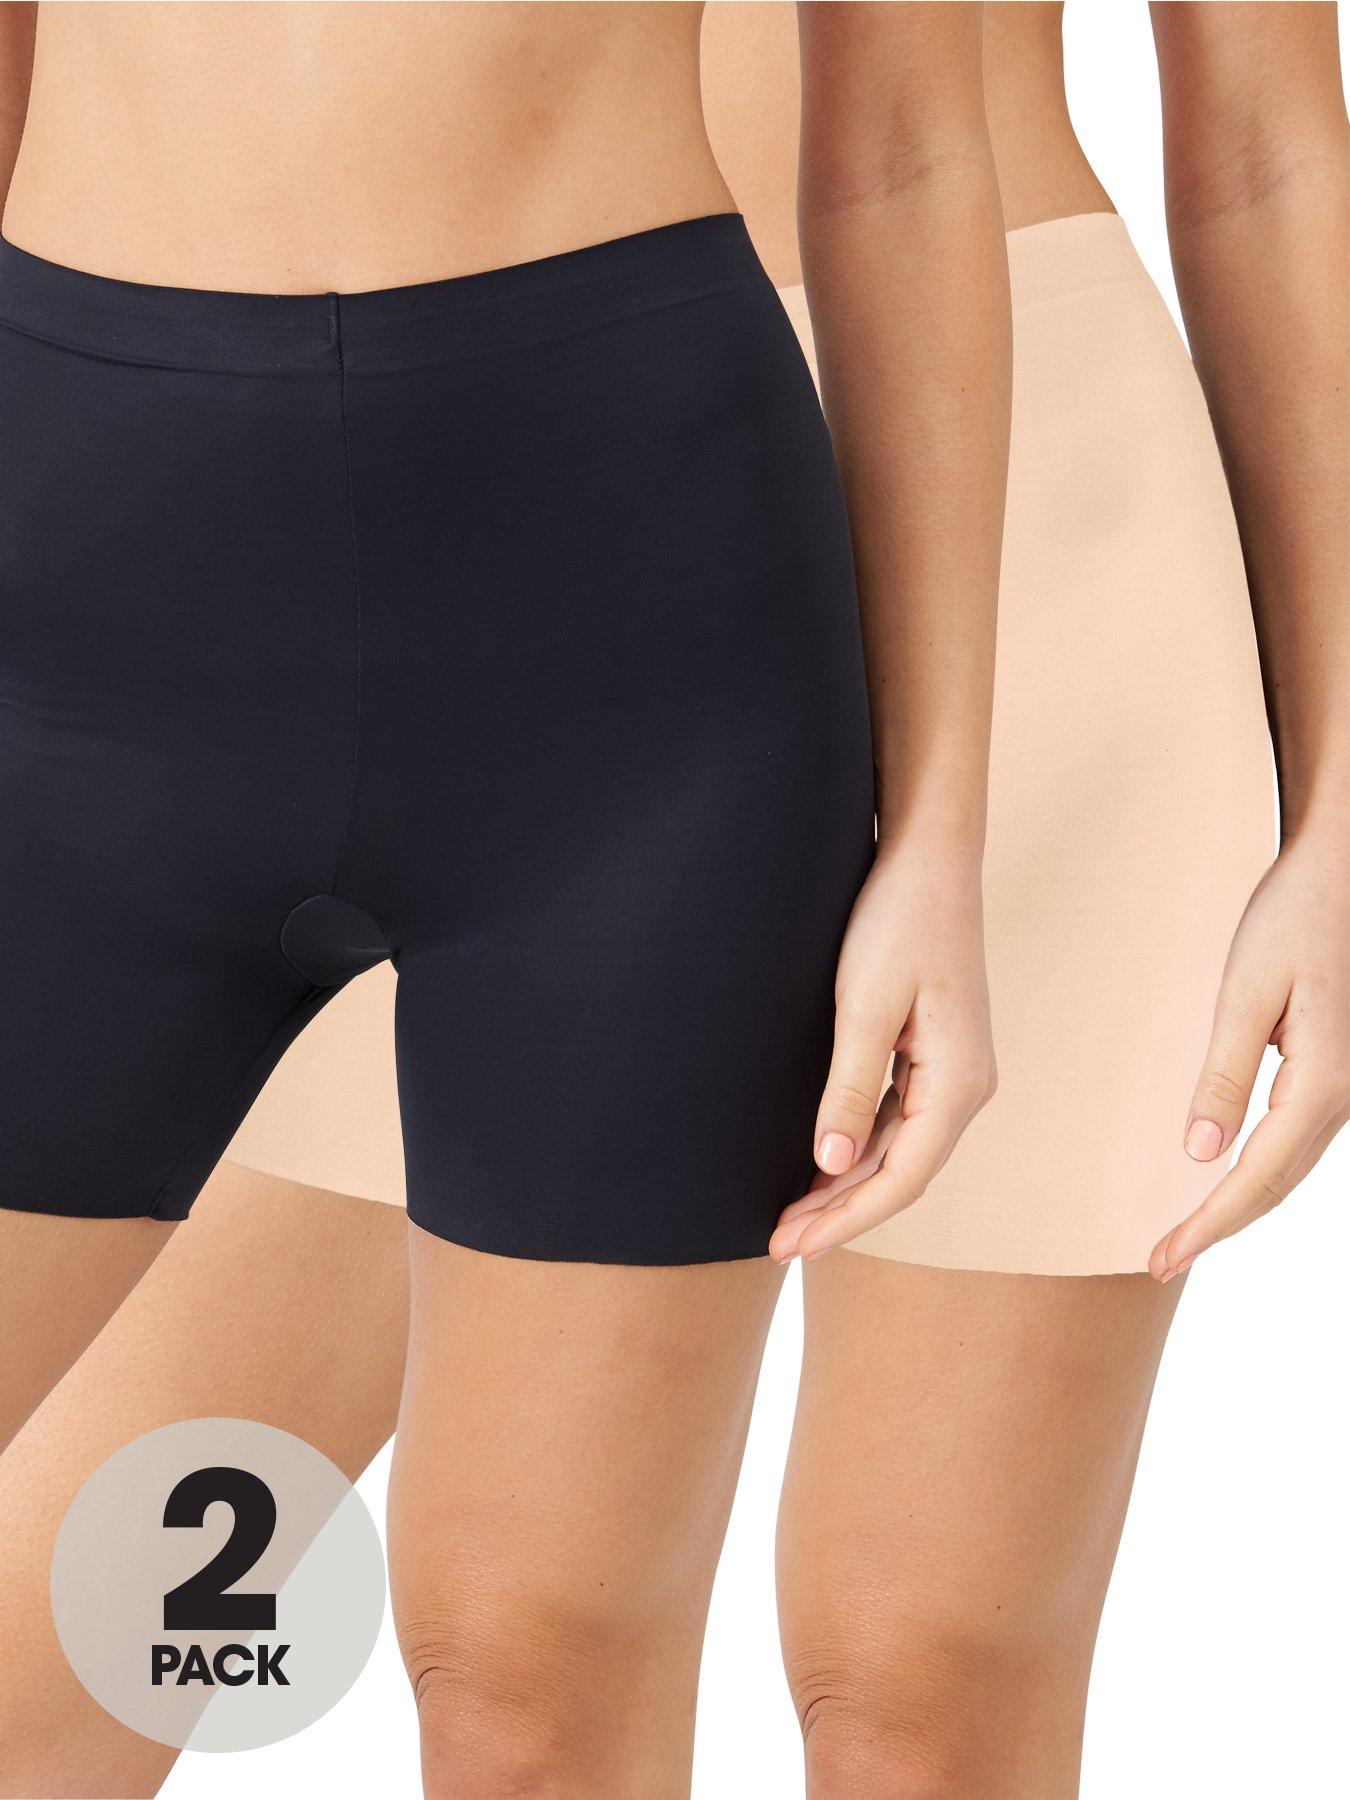 Maidenform 2 Pack Cover Your Bases Girlshorts - Nude/Black